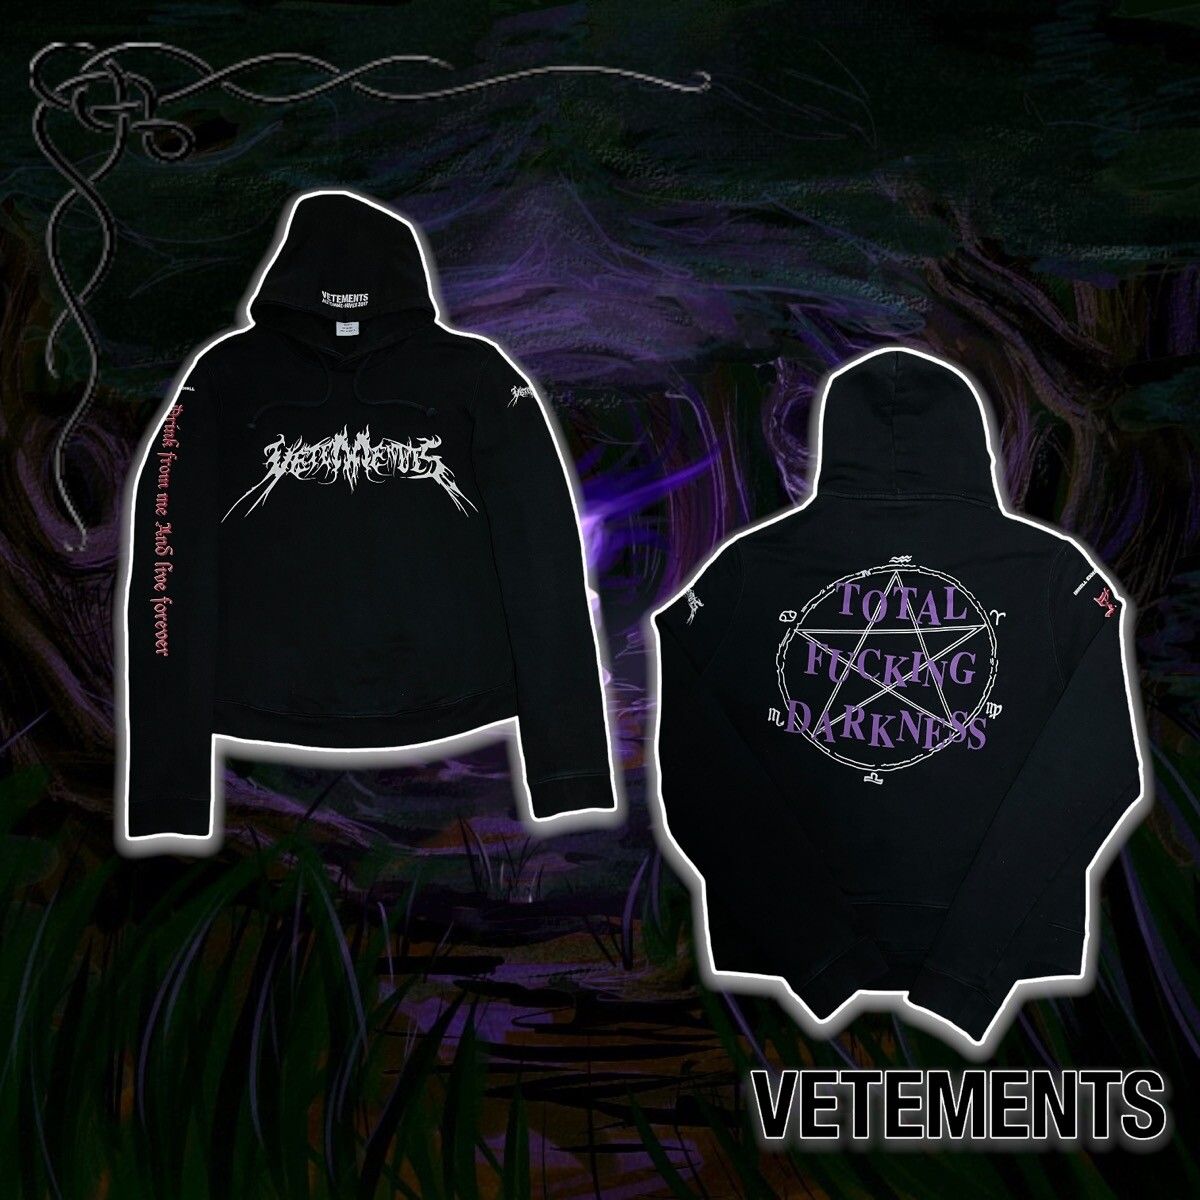 Vetements Vetements Total Fucking Darkness Hoodie Size US L / EU 52-54 / 3 - 2 Preview